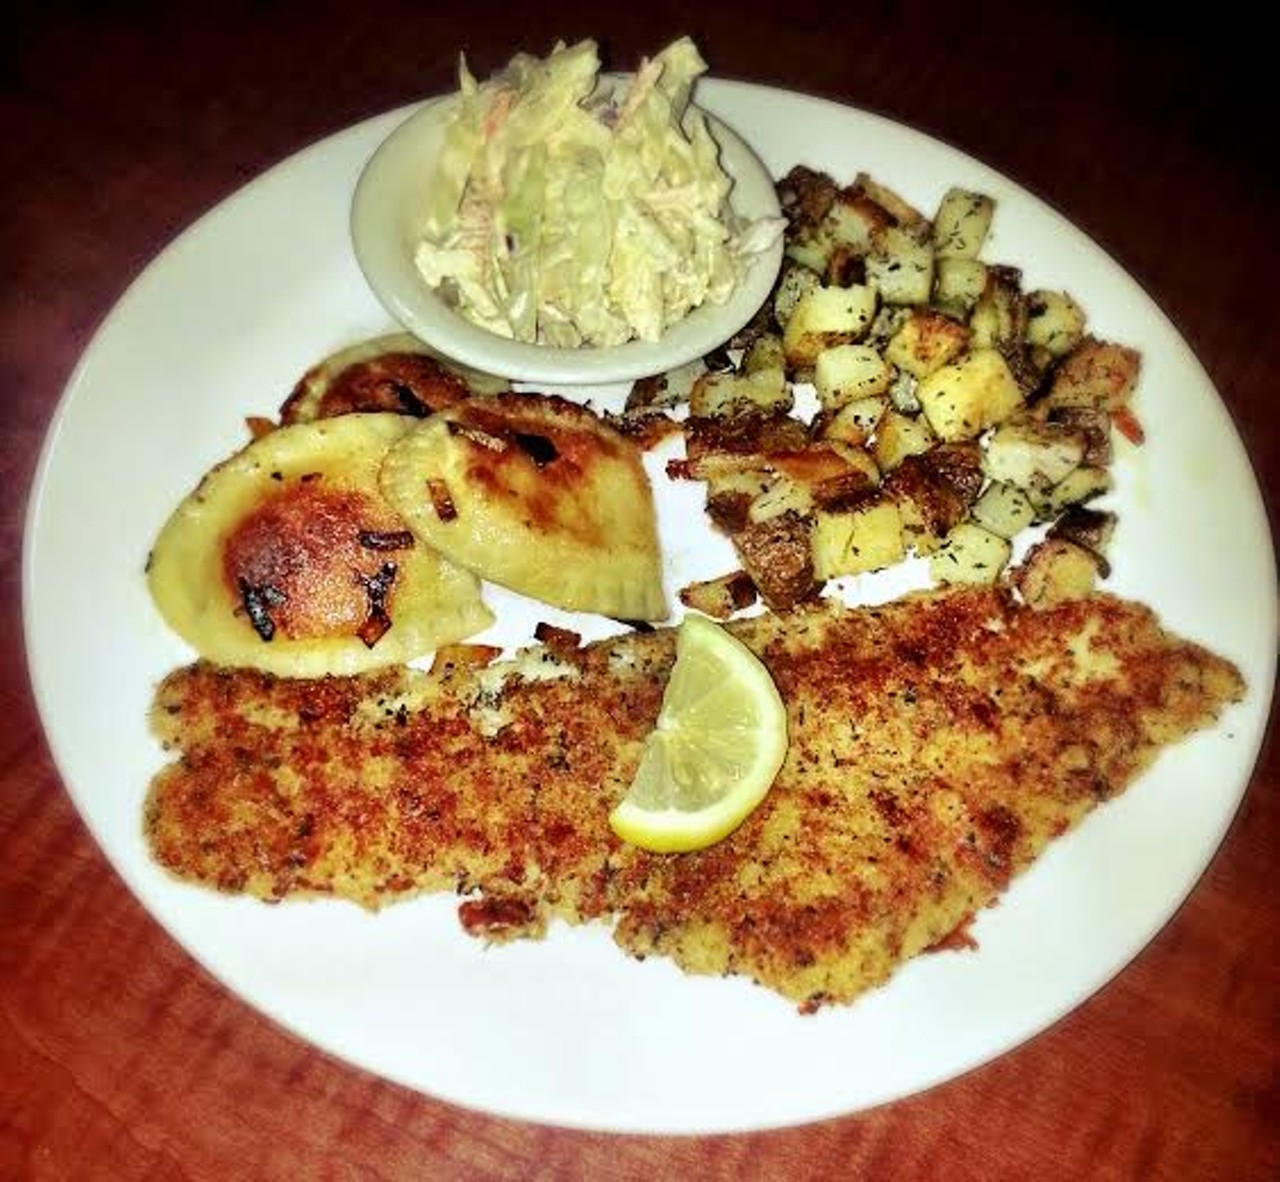 The Anti-Fish Fry: no fryers needed here. Grumpy's serves up a lightly breaded and grilled haddock along with herb roasted potatoes, and Southwest slaw. Add pierogies for $2 more. Served every Friday through Lent.